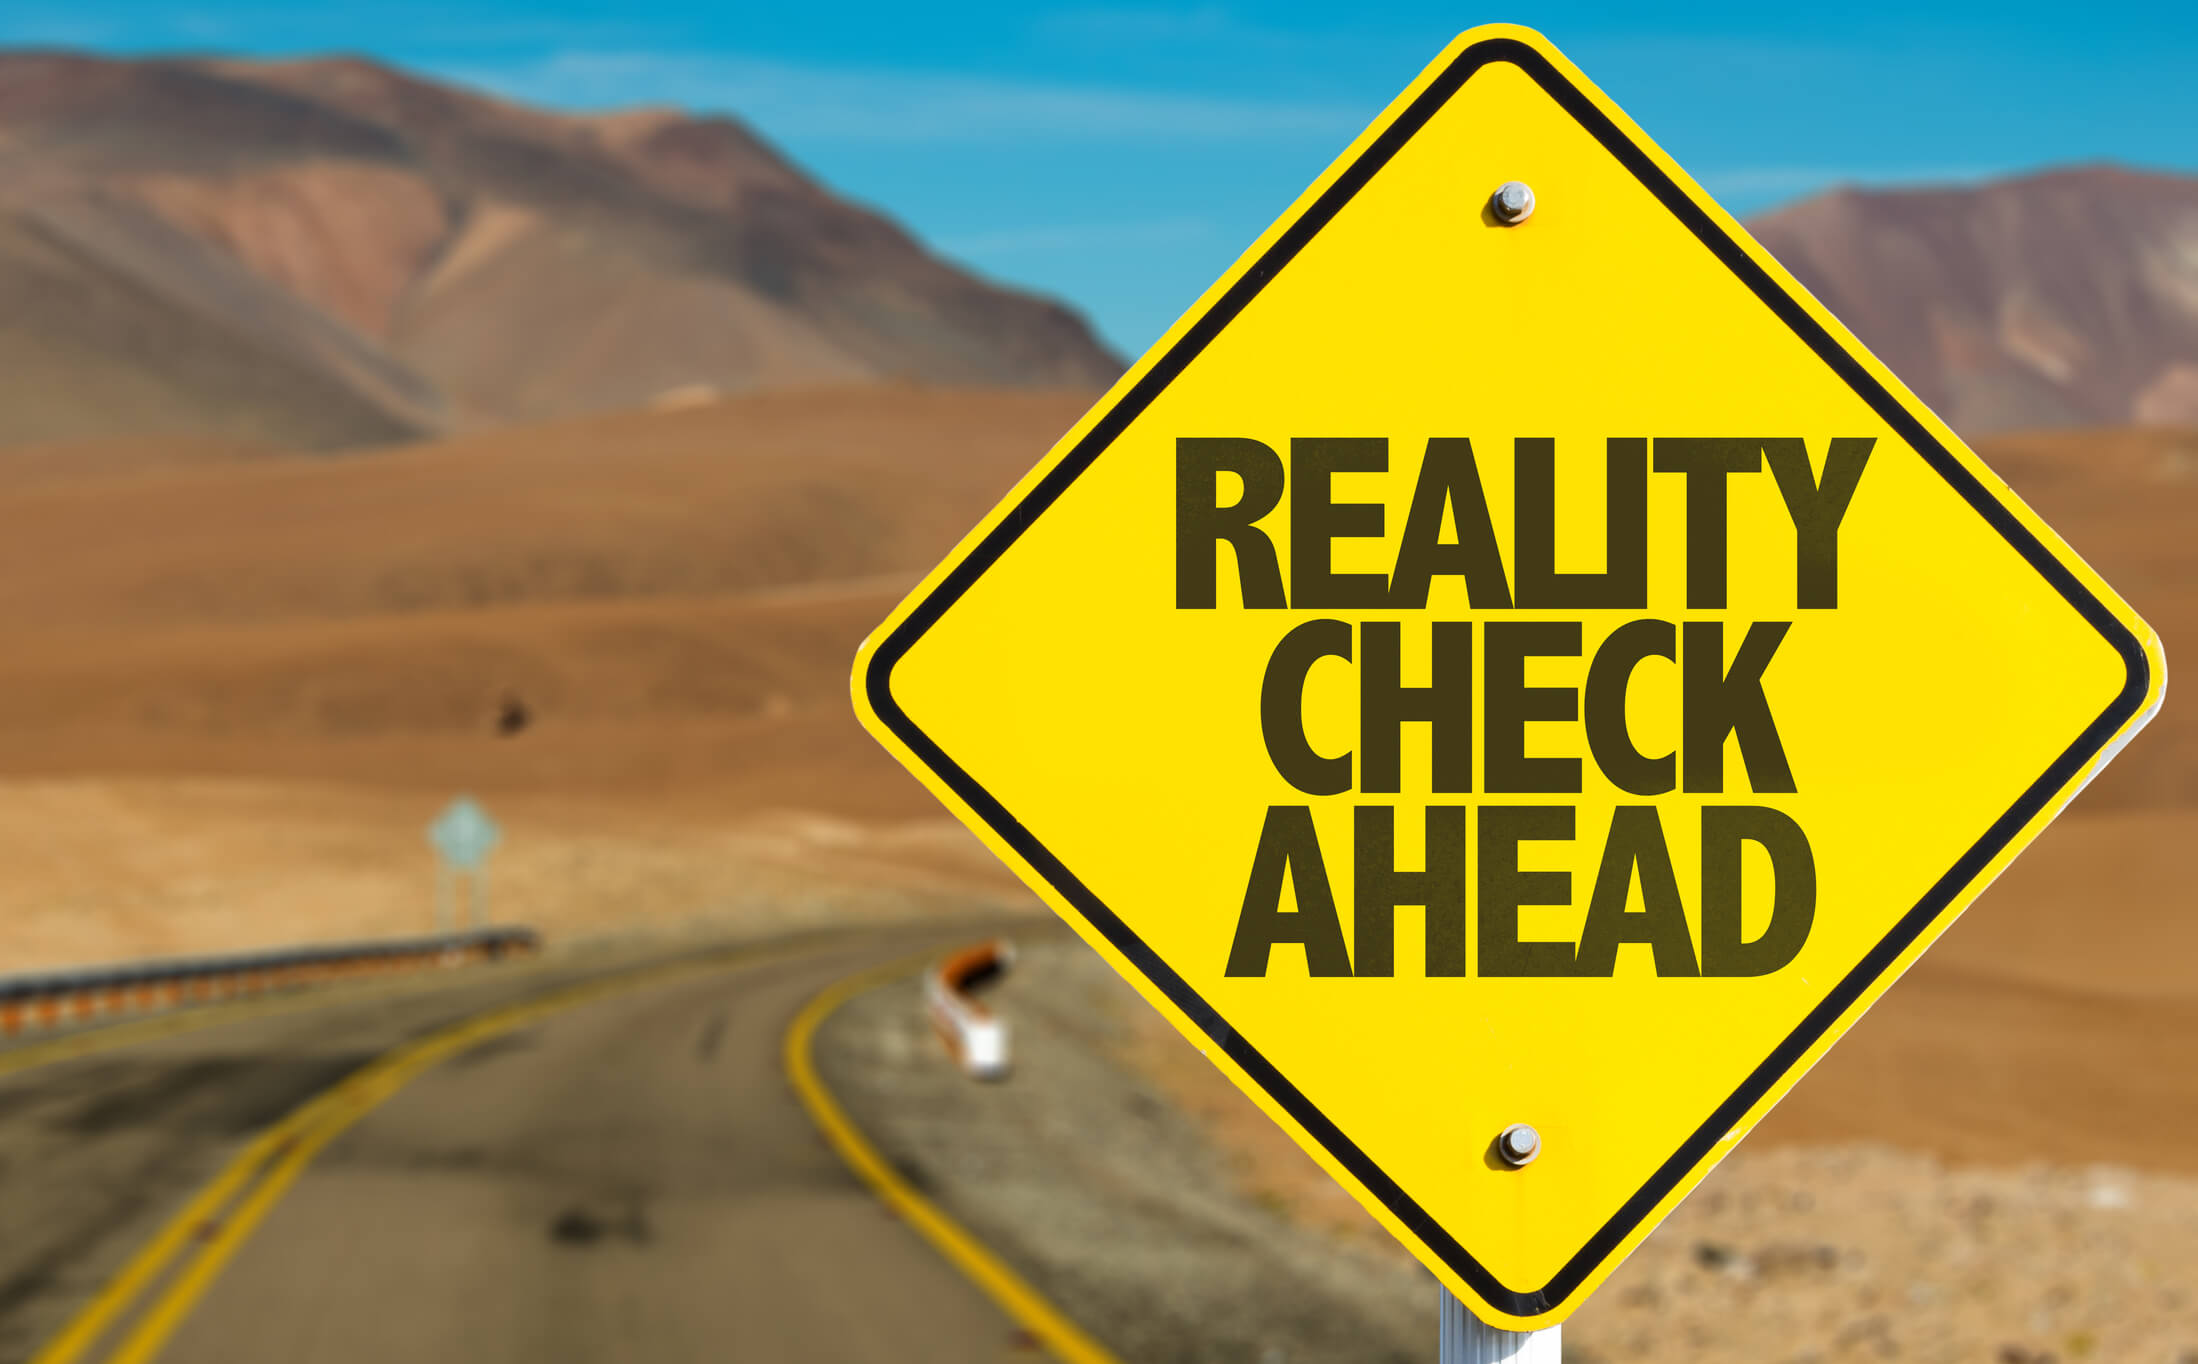 Reality check ahead road sign